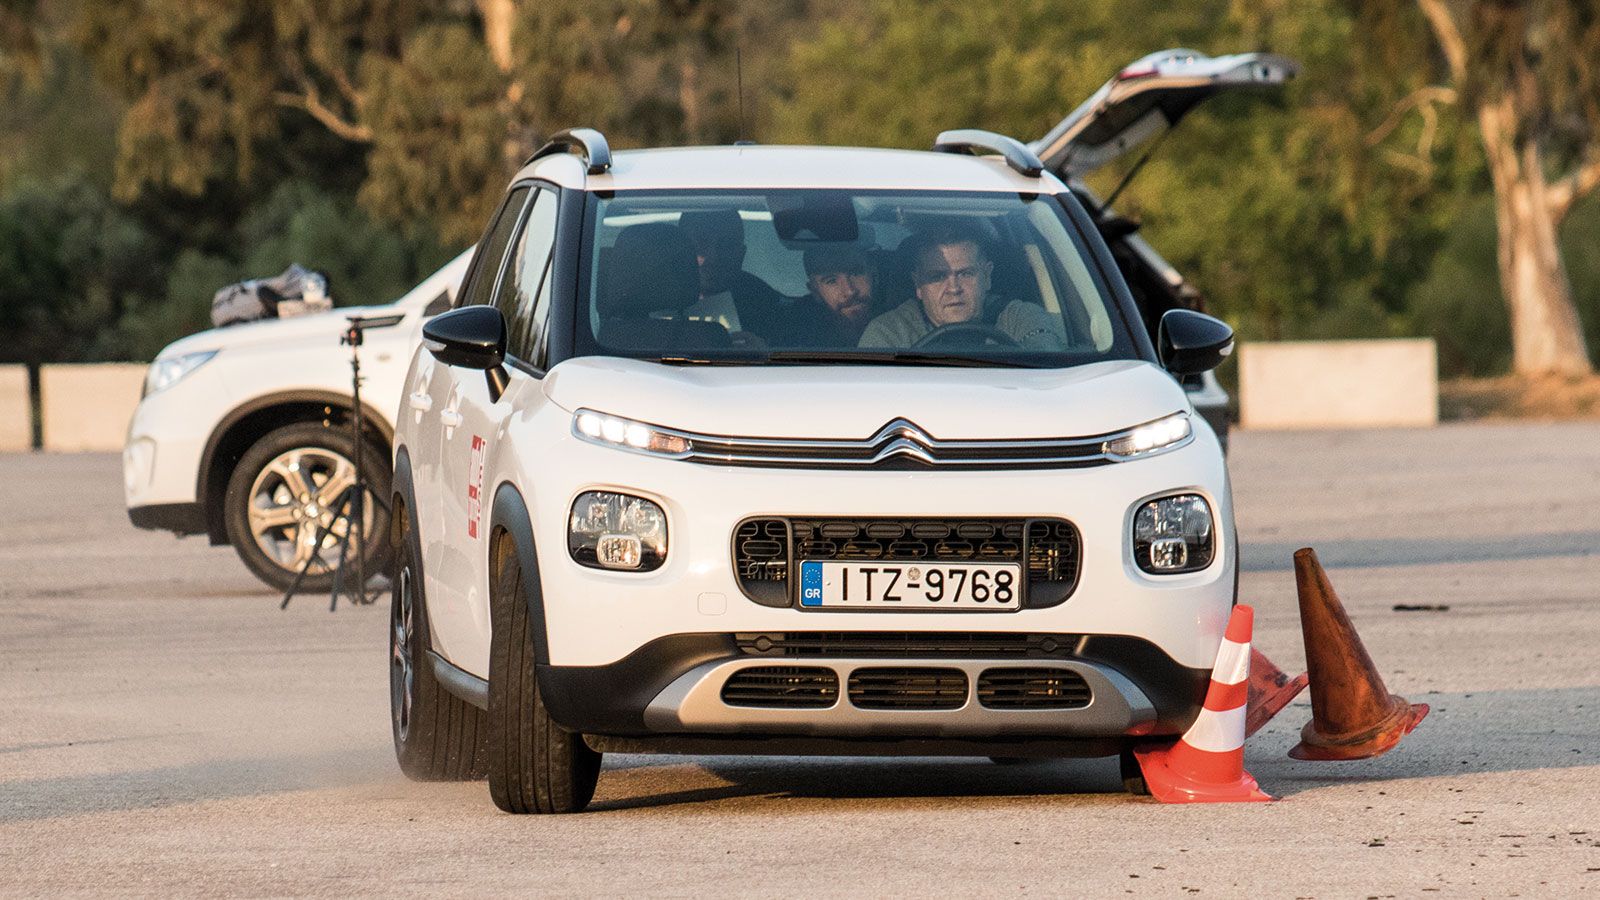 Typical Strict Therefore Citroen C3 Aircross: Κυνηγώντας το 1 χλμ./ώρα παραπάνω